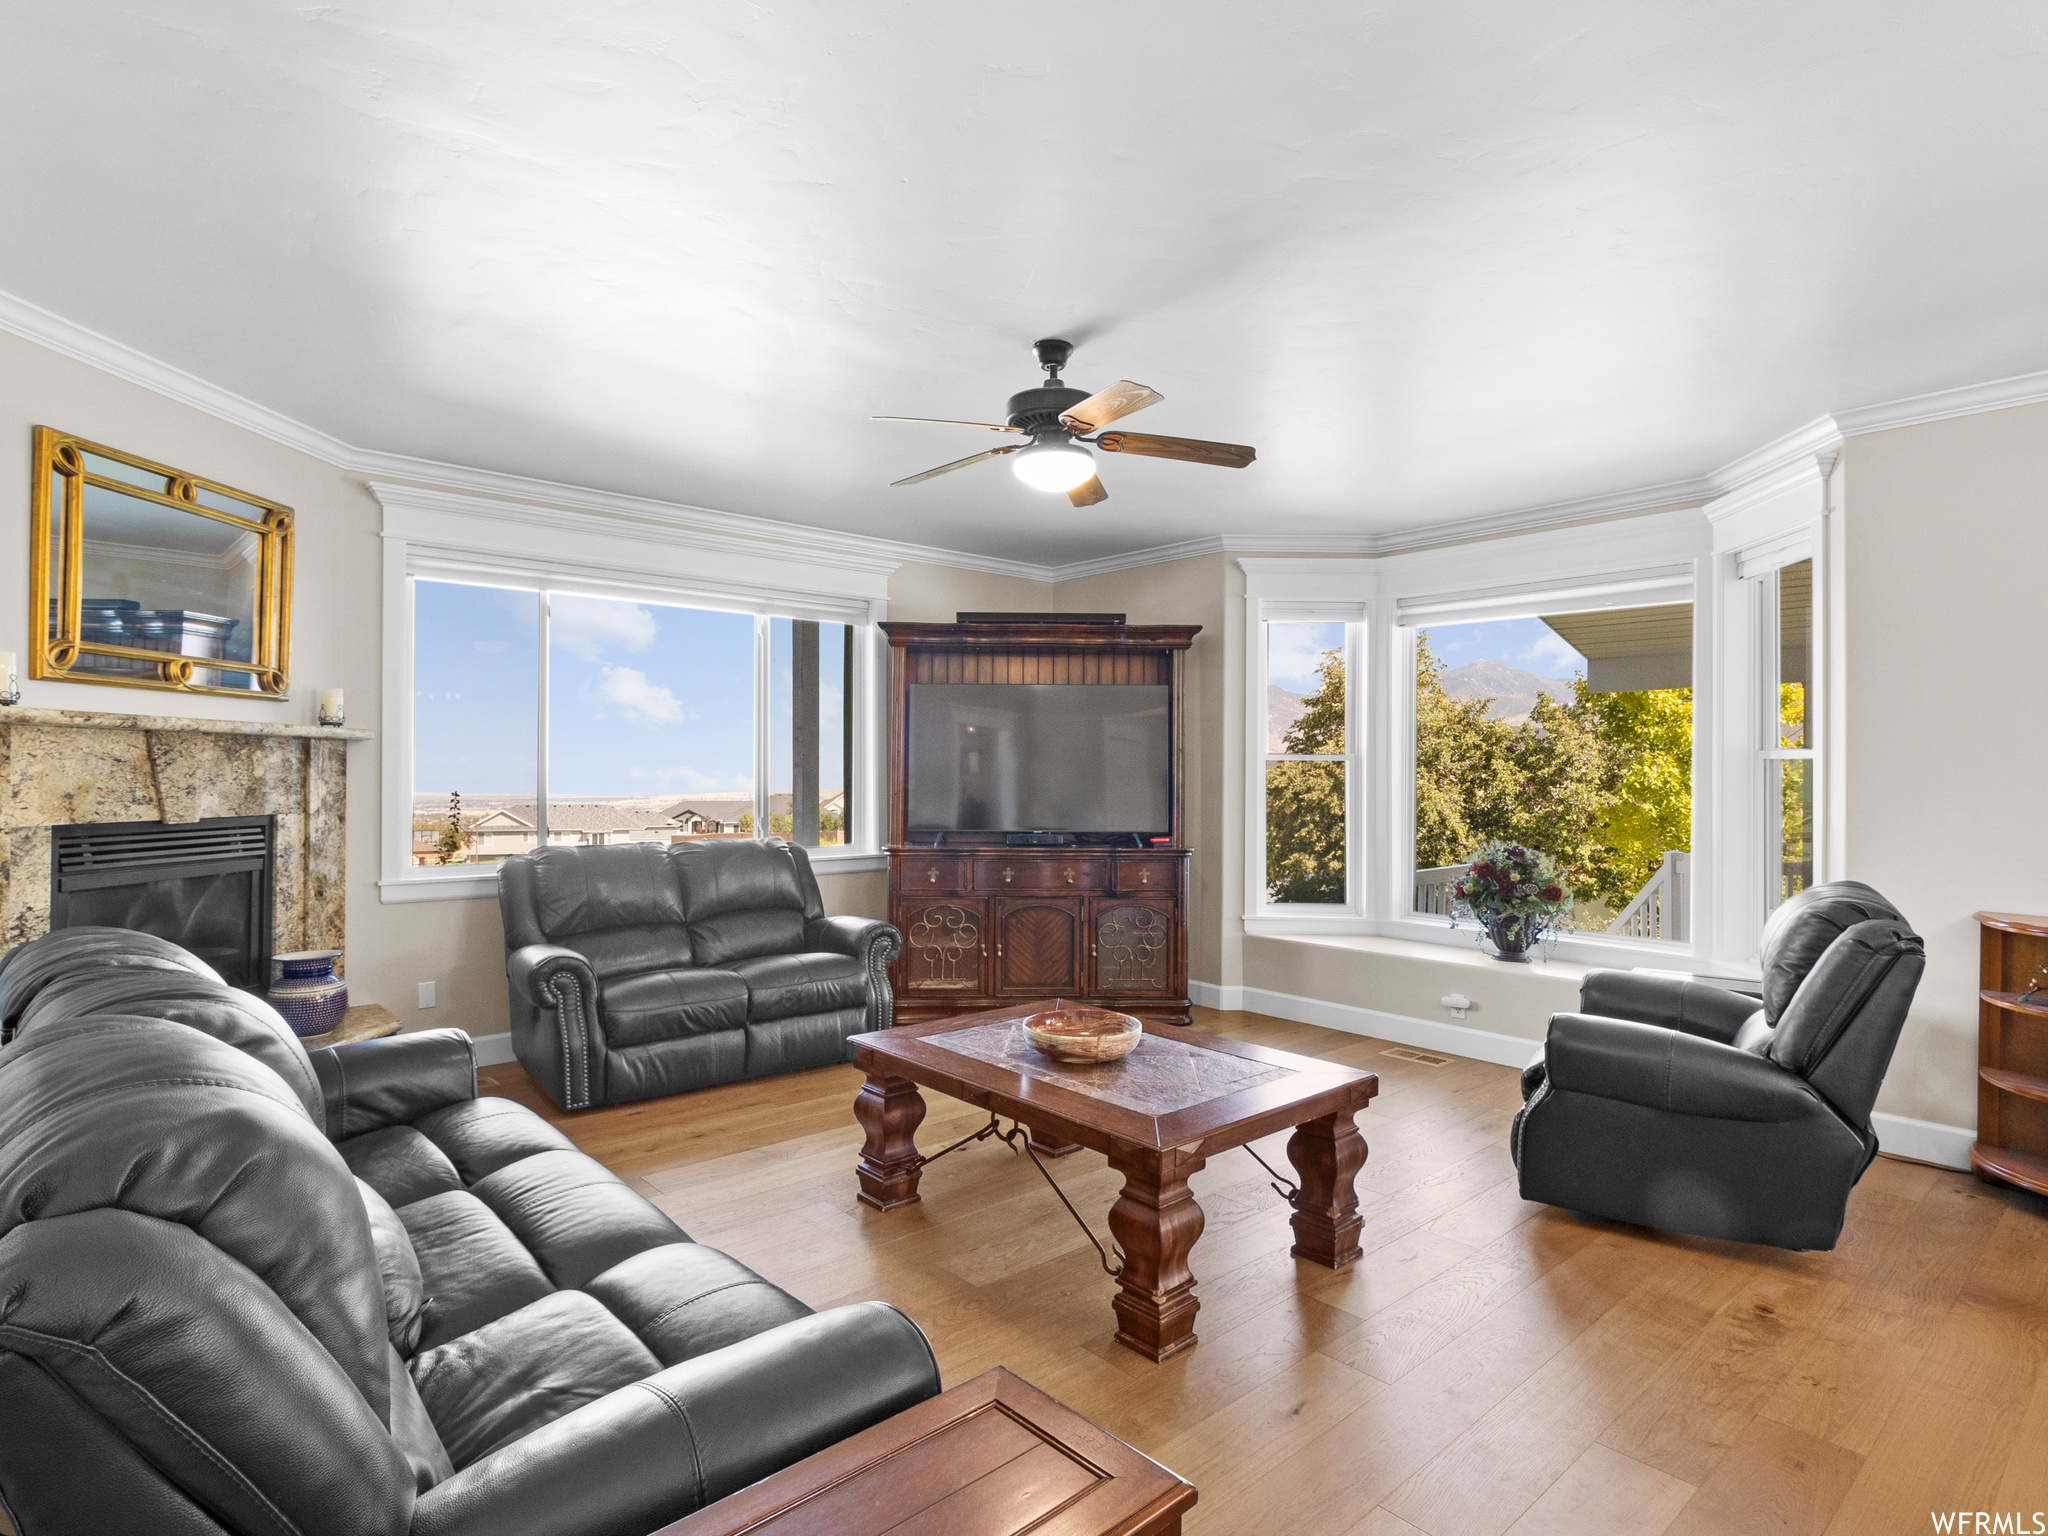 Living room featuring ceiling fan, light hardwood flooring, a fireplace, and crown molding